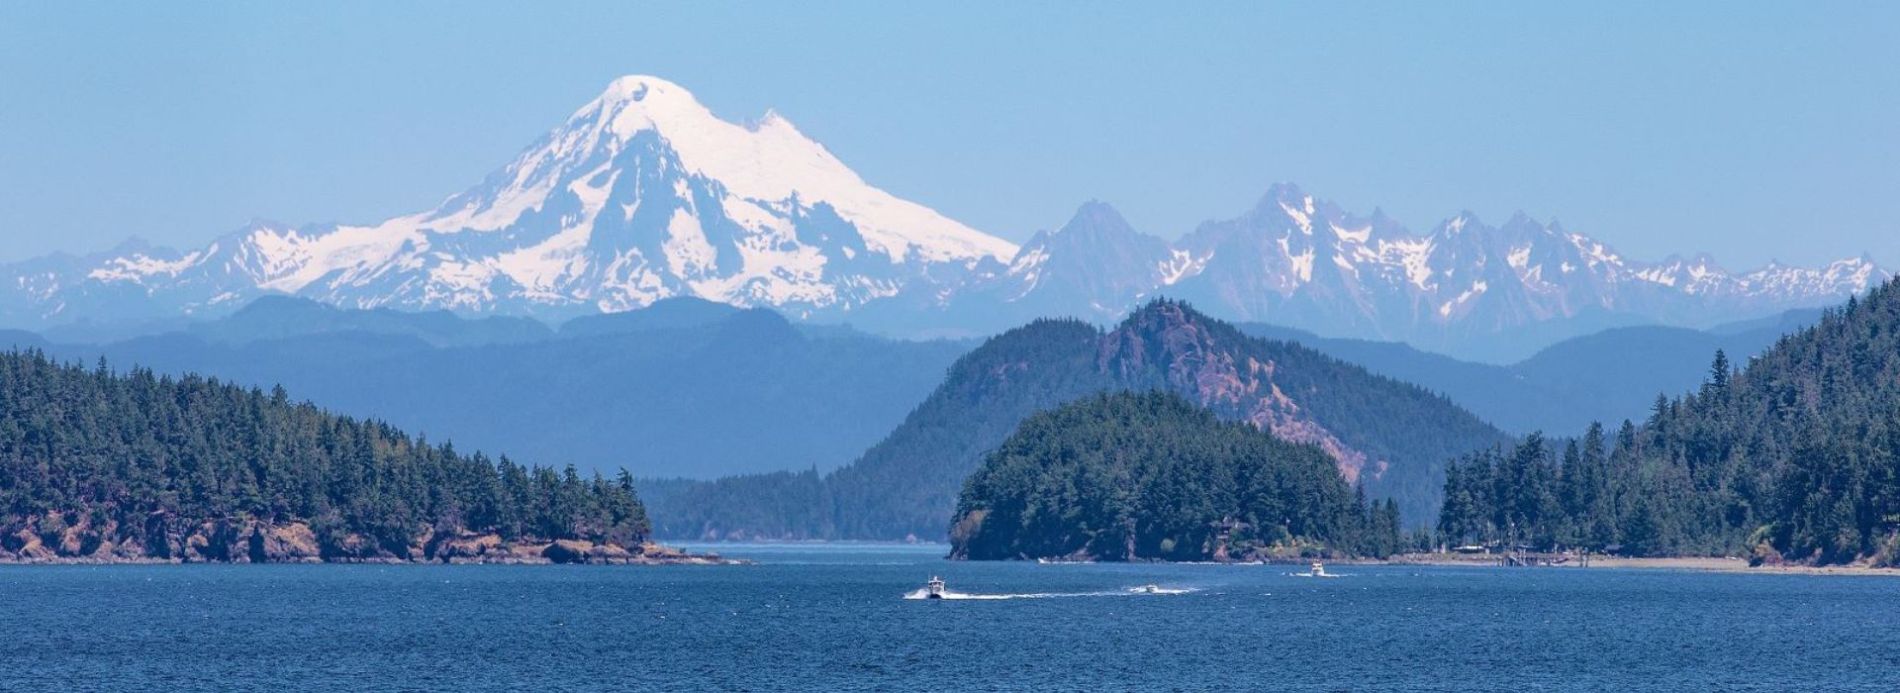 The Most Popular Things To Do in the San Juan Islands Feature Image